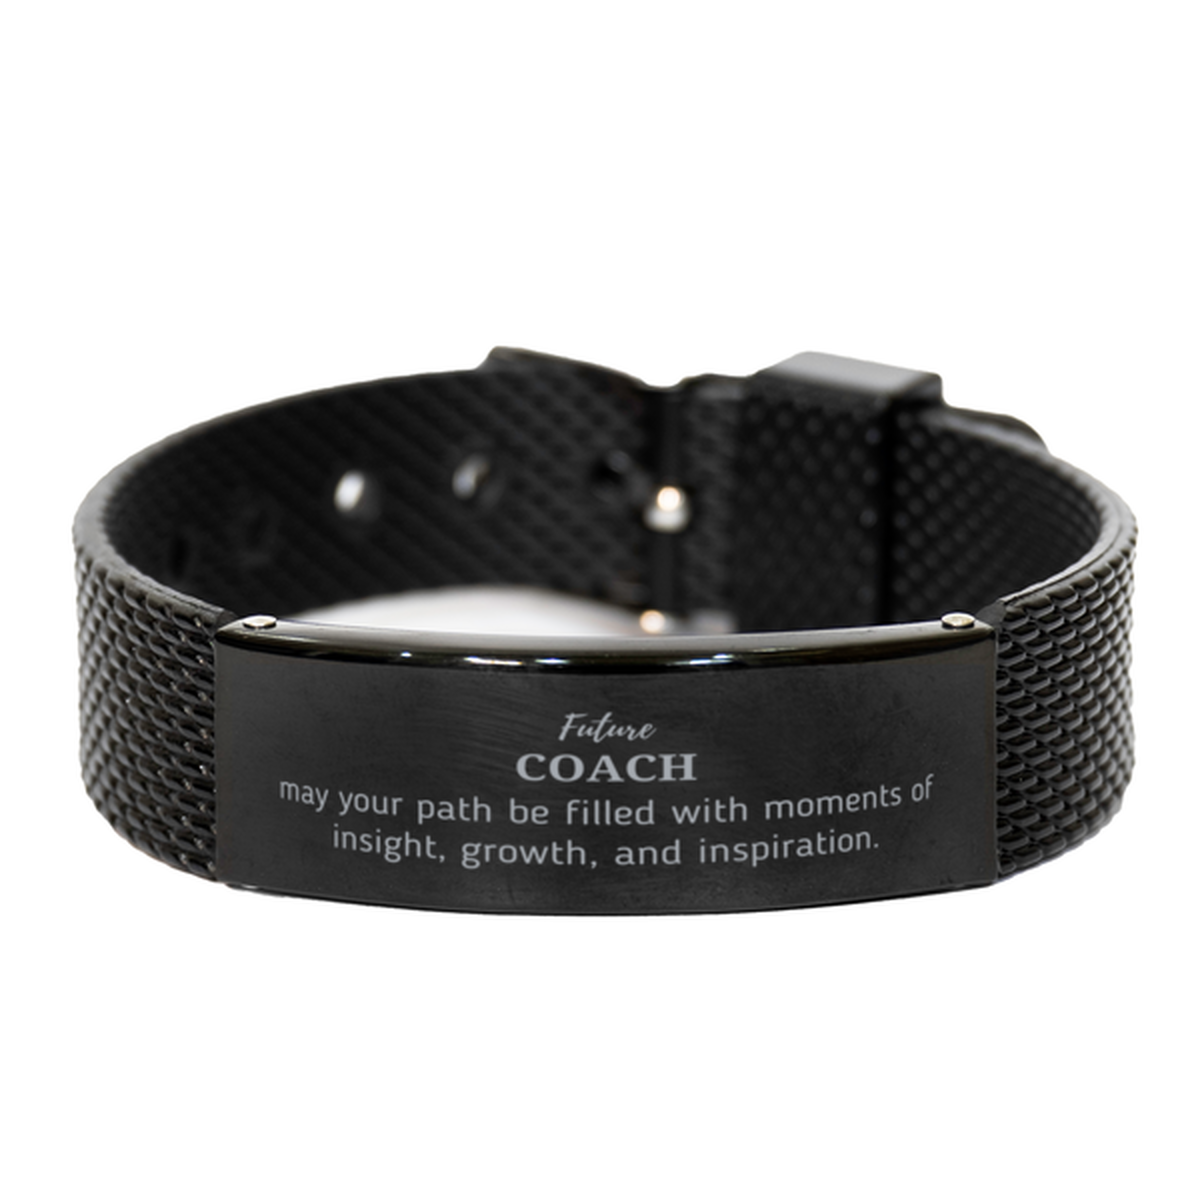 Future Coach Gifts, May your path be filled with moments of insight, Graduation Gifts for New Coach, Christmas Unique Black Shark Mesh Bracelet For Men, Women, Friends